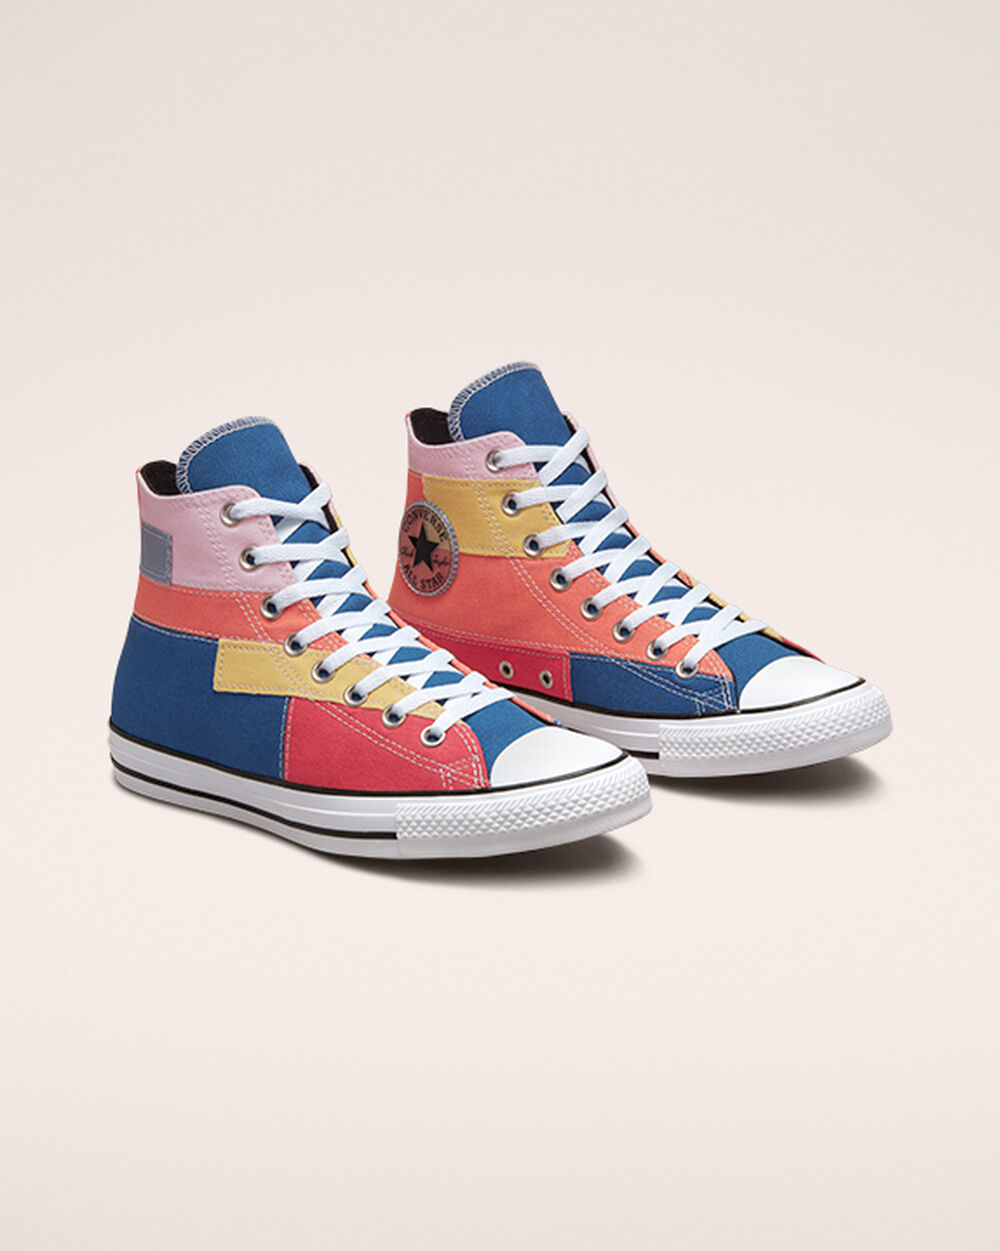 Tenis Converse Chuck Taylor All Star Mujer Azules Rosas | Mexico-715806